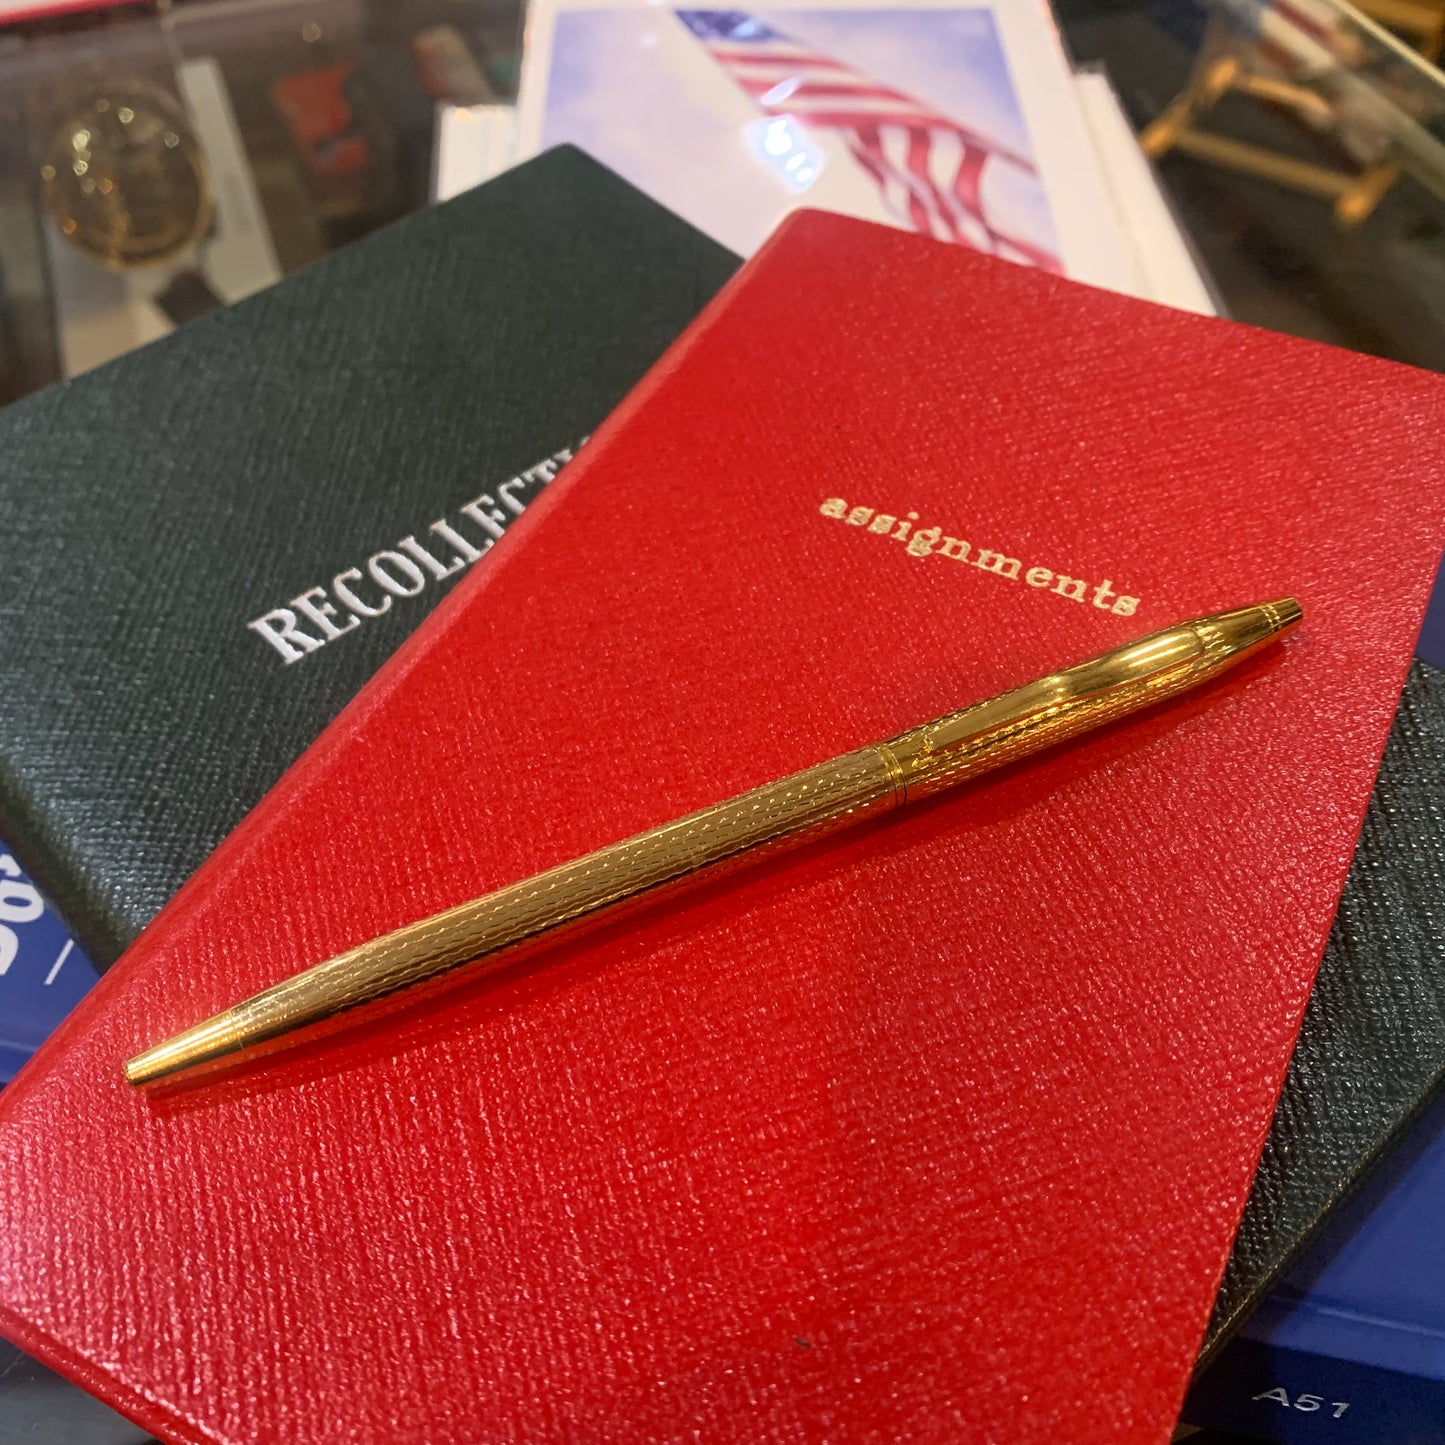 1 Gold Pen for Leather Journal | Thin / Slender Gold Pen / Writing Instrument | Charing Cross Leather